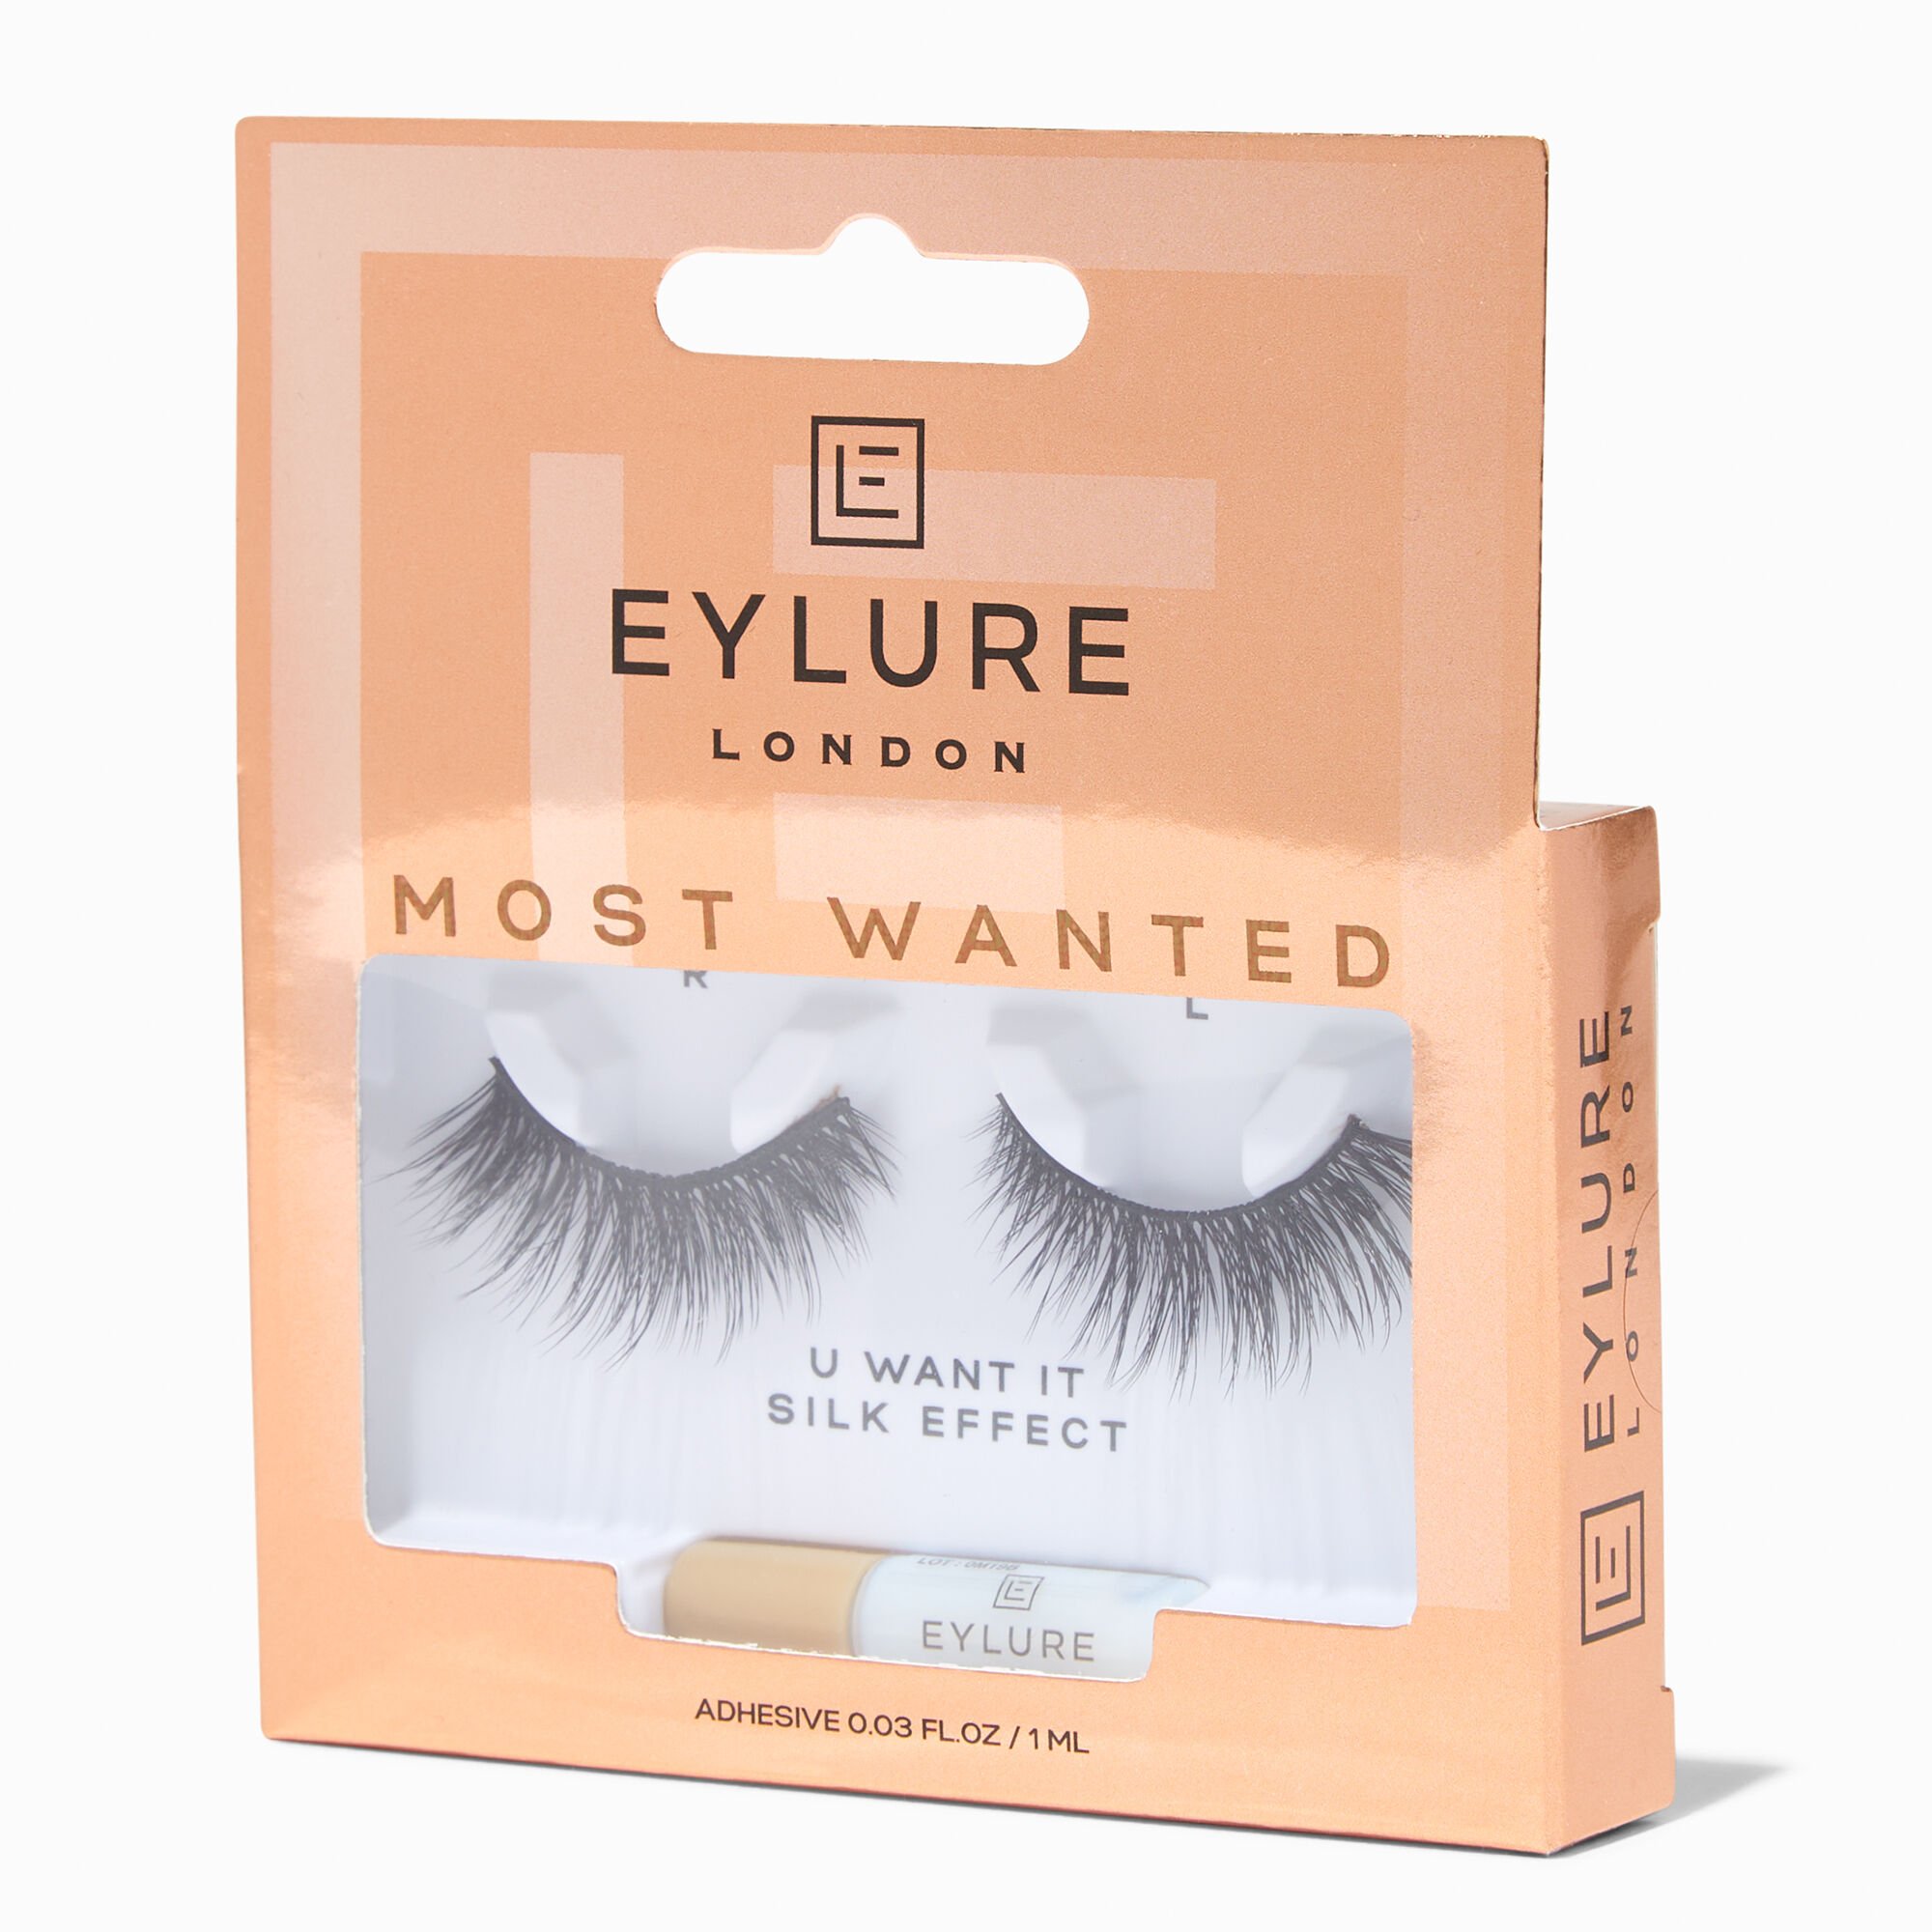 View Claires Eylure Most Wanted Faux Mink Eyelashes U Want It Black information